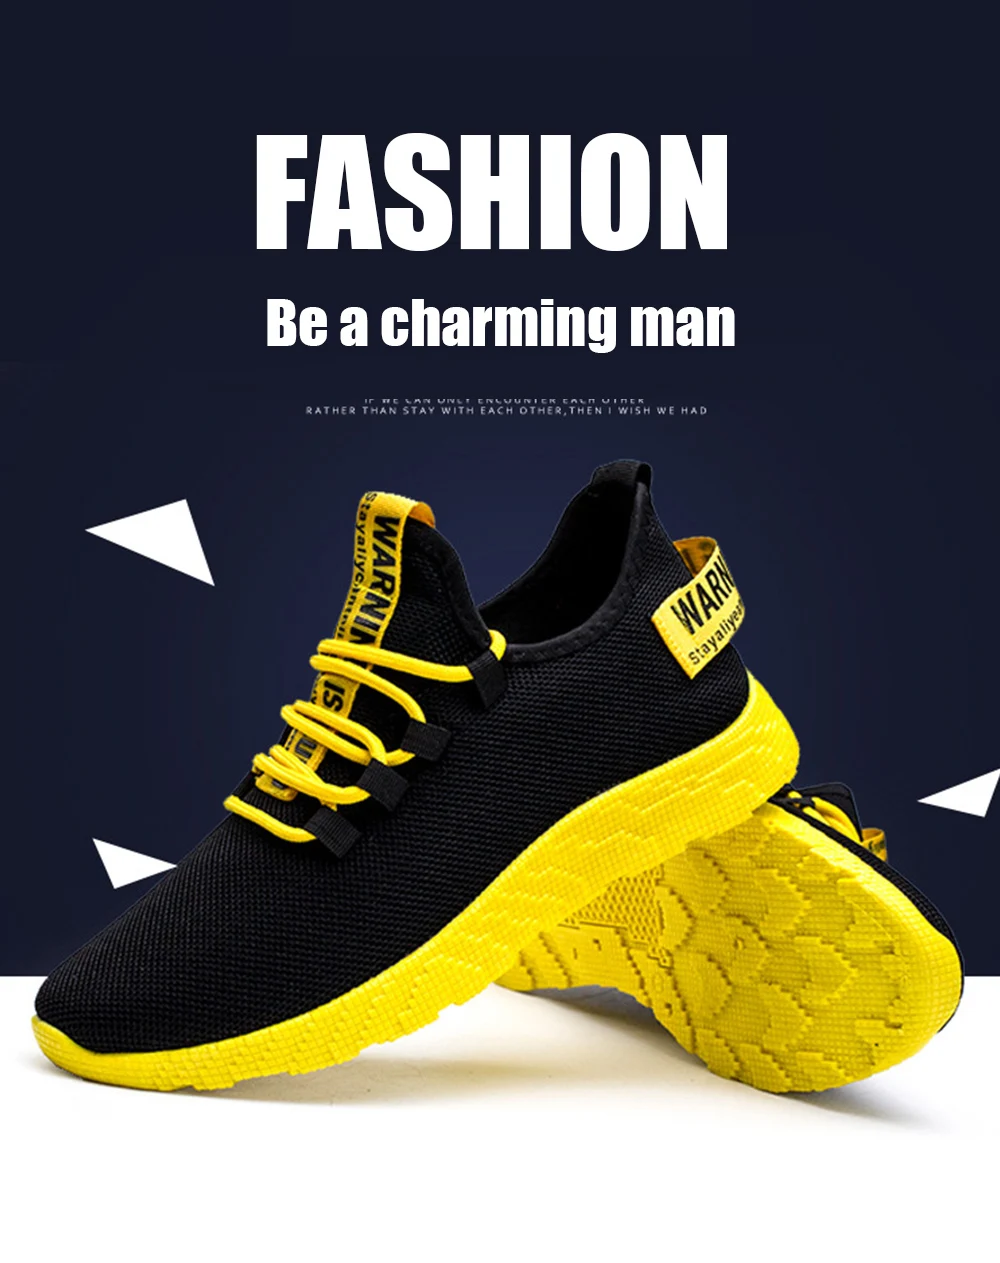 HTHJSCO Men Shoes Flying Weaving Mesh Sneakers Casual Breathable Walking Non-Slip Shoes Lightweight Lace-Up Sneakers